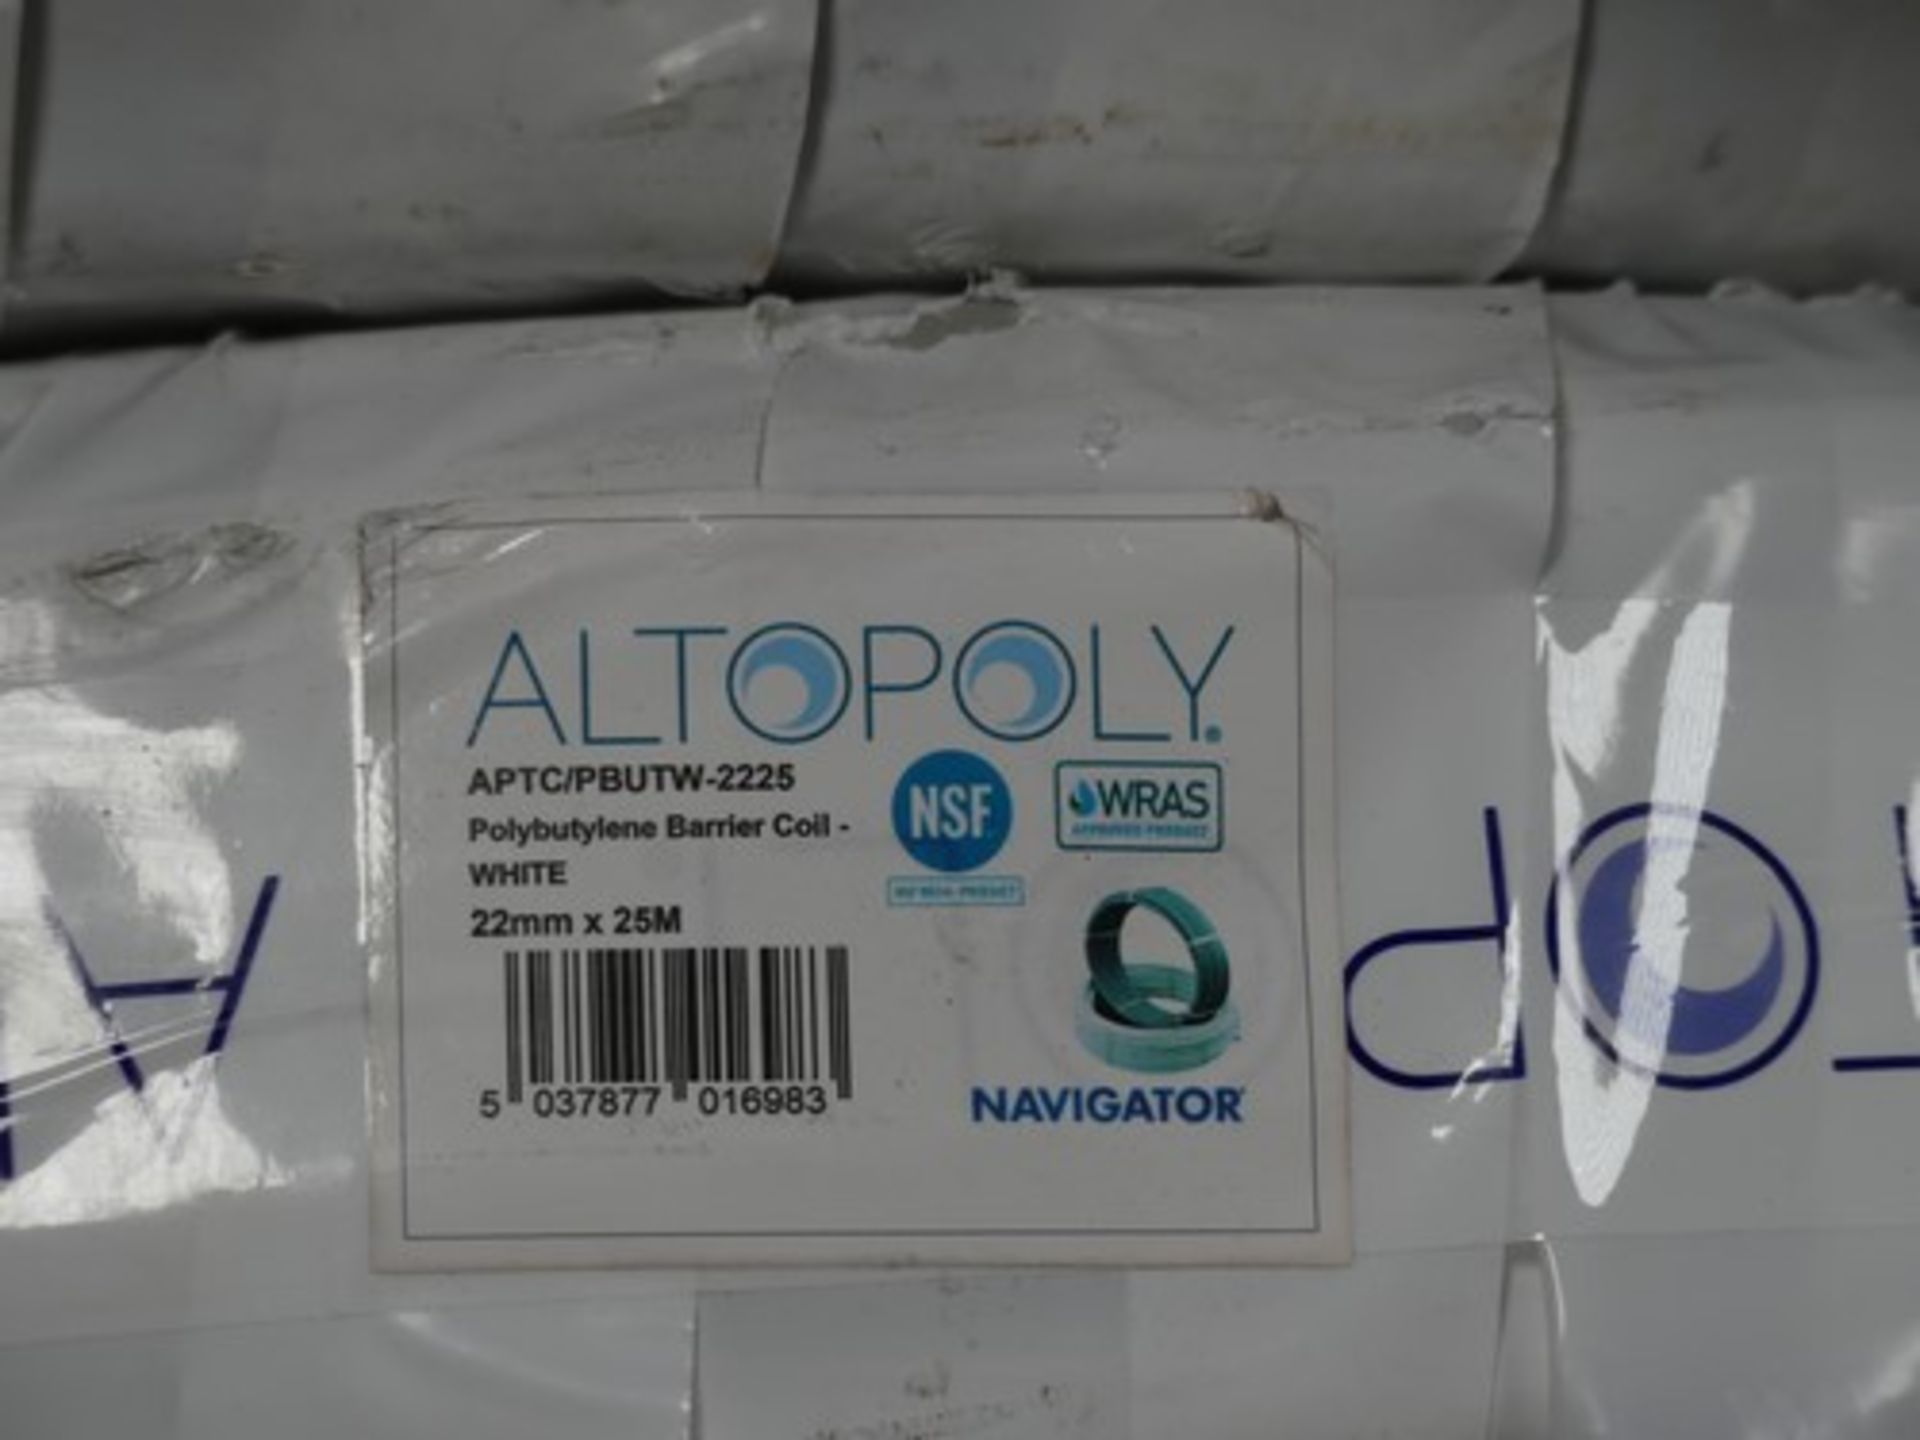 6 x rolls of Altopoly polybutylene barrier coil, comprising 3 x rolls of 15mm x 25m - white, 1 x - Image 5 of 5